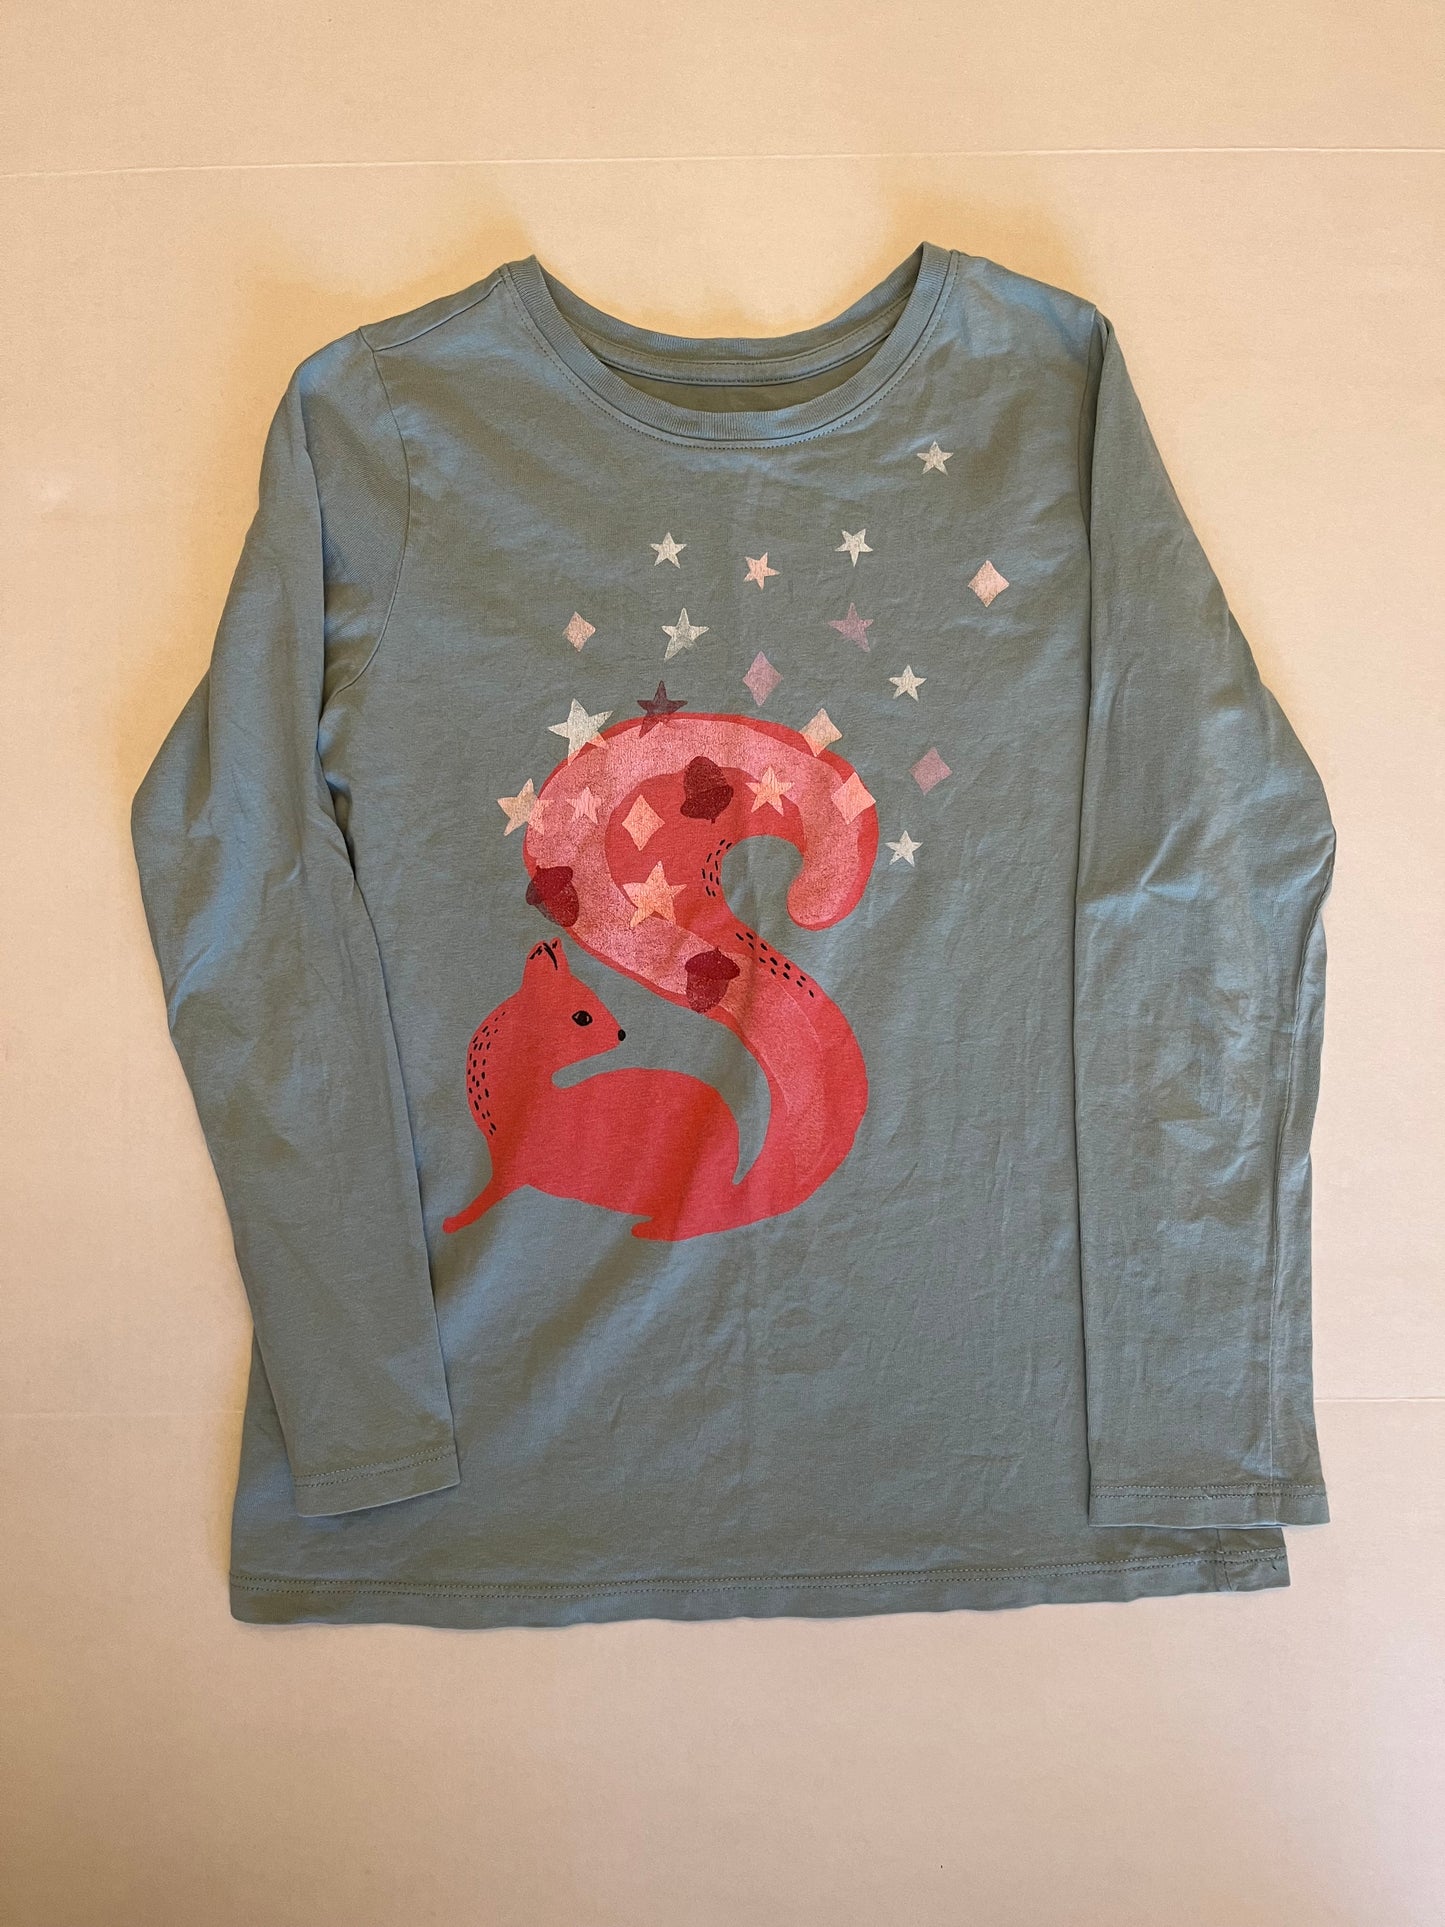 Tea Collection long sleeved squirrel shirt. Girls size 10 PPU Mariemont